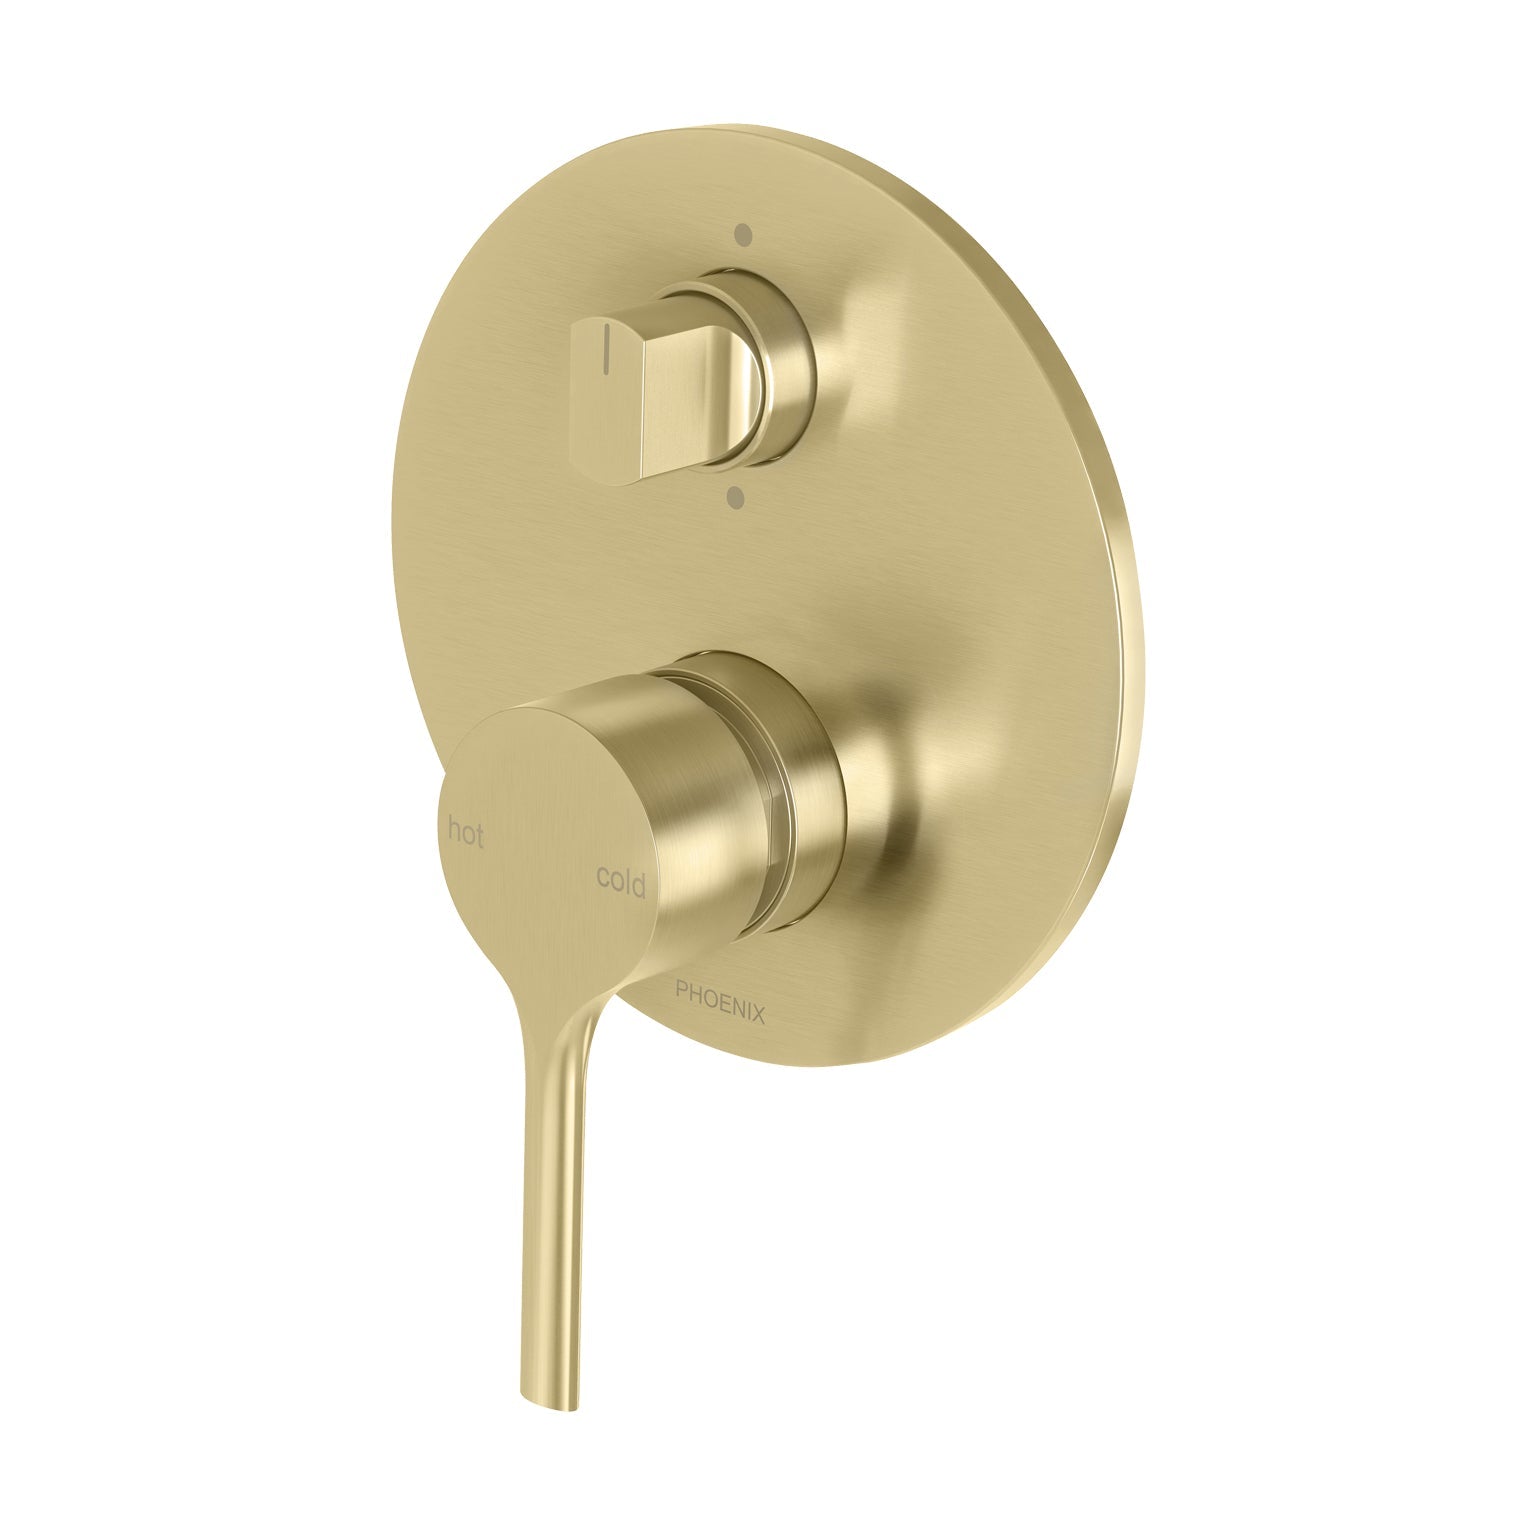 PHOENIX VIVID SLIMLINE OVAL SWITCHMIX SHOWER / BATH DIVERTER MIXER FIT-OFF AND ROUGH-IN KIT BRUSHED GOLD